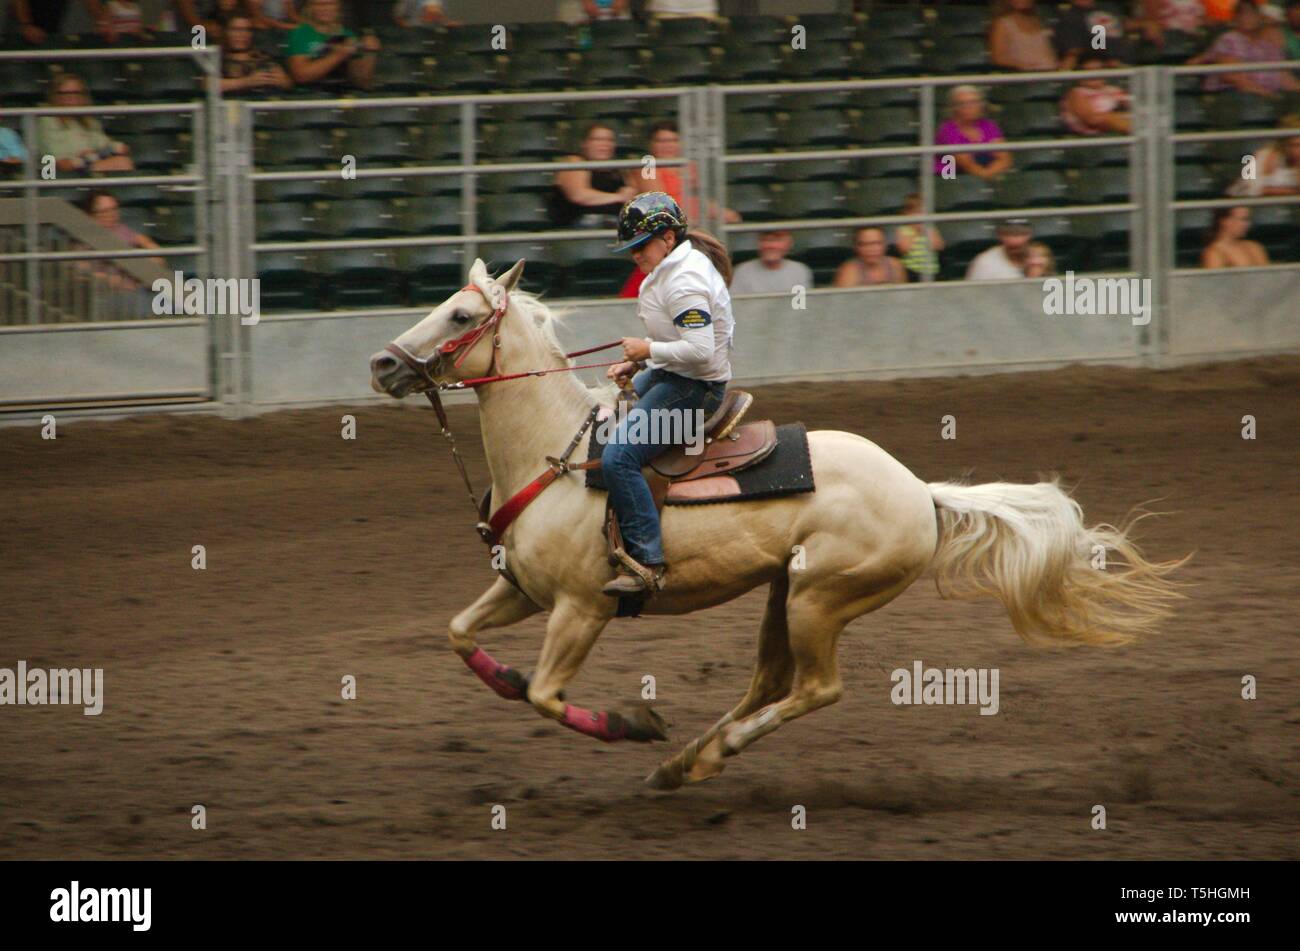 Female horse rider at a rodeo competition at the Iowa State Fair. Stock Photo